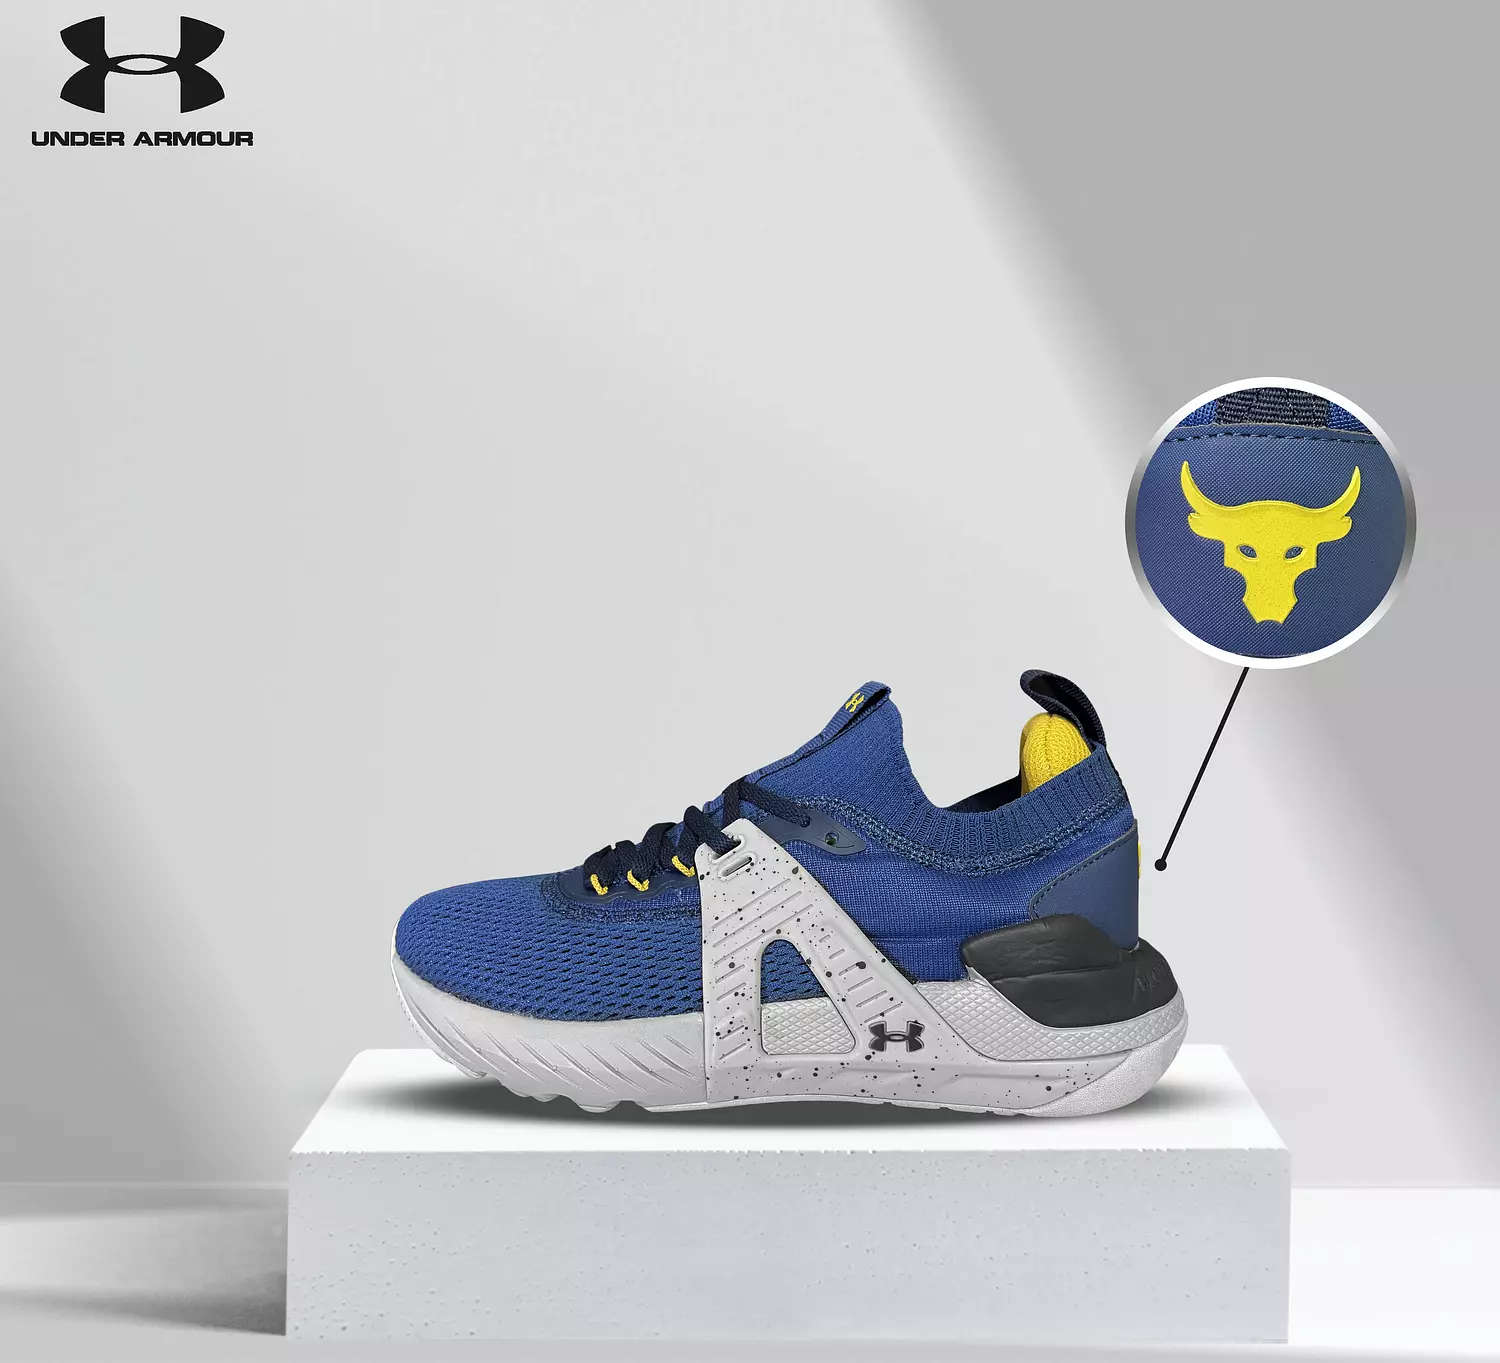 UNDER ARMOUR RUNNING SHOES 0